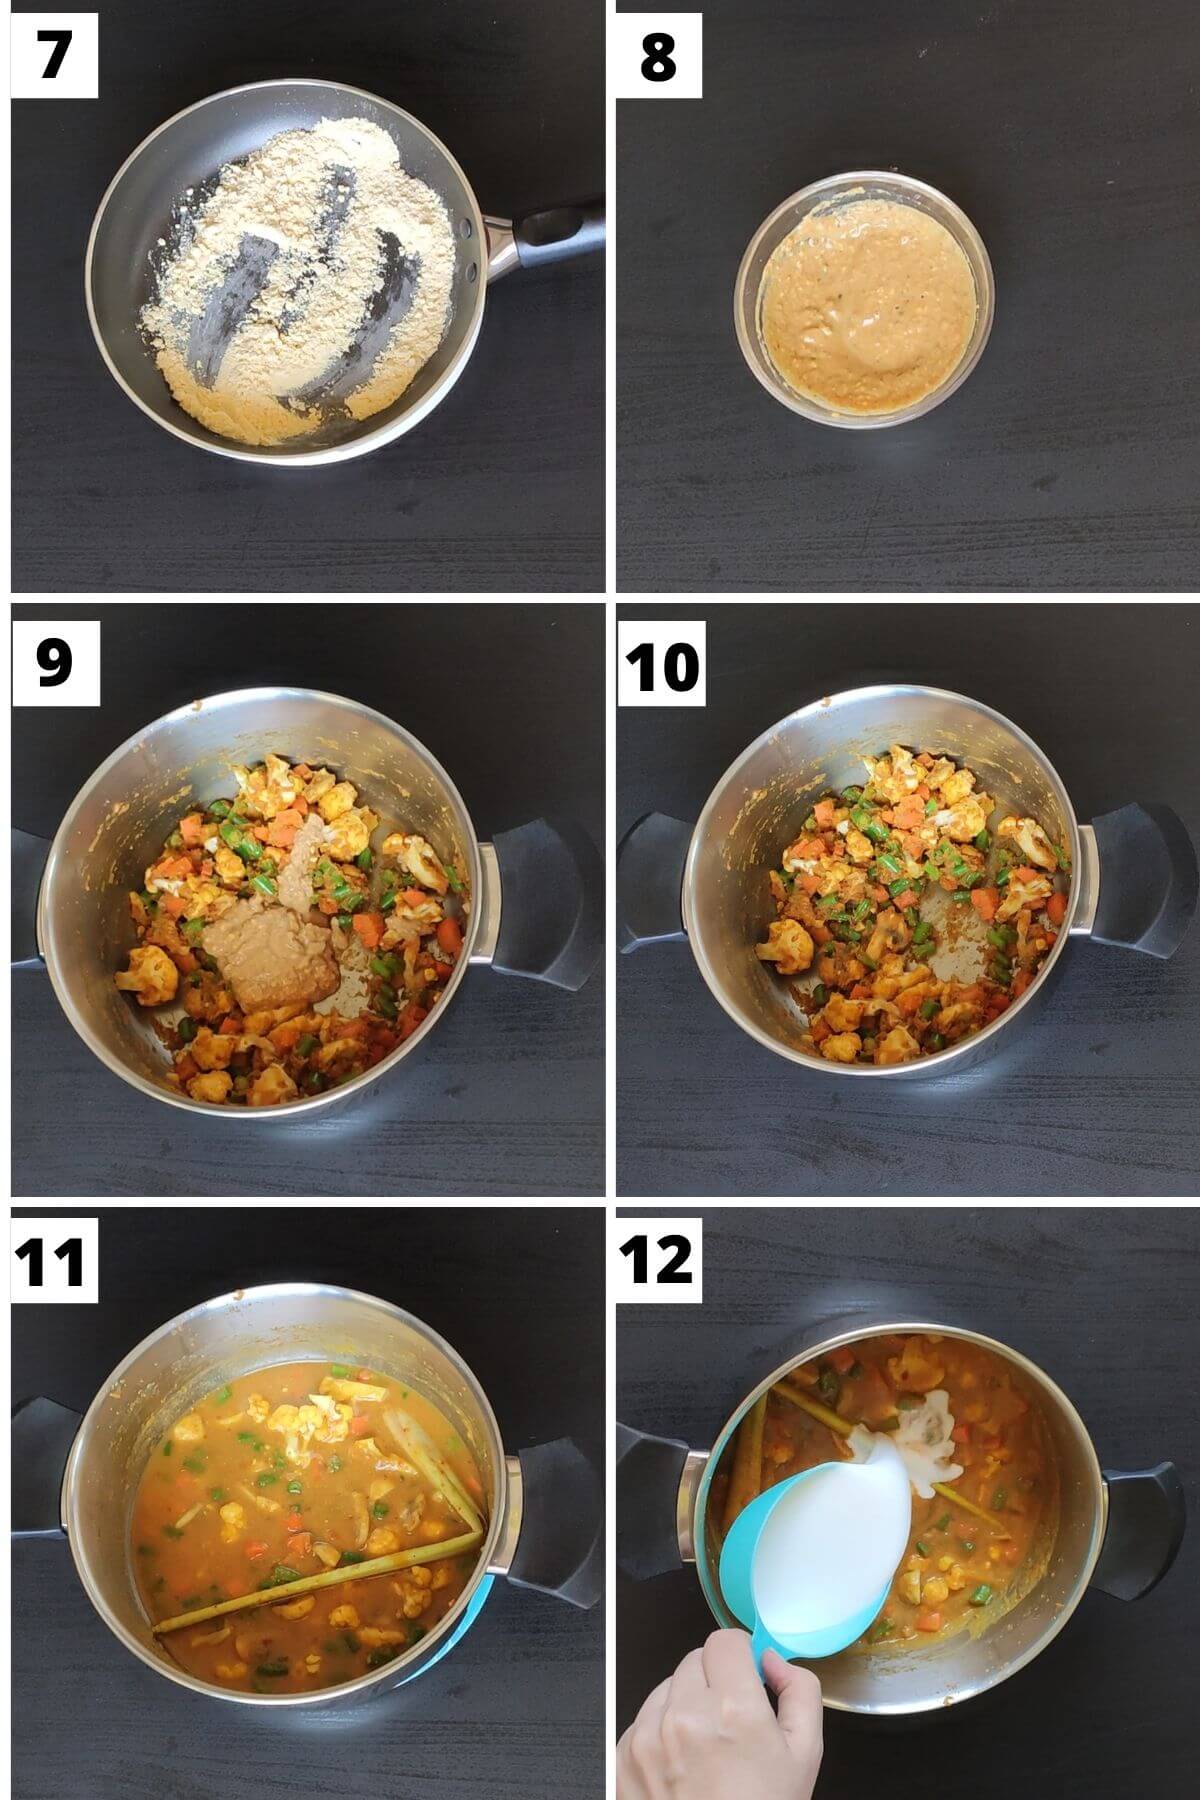 Collage of steps 7 to 12 of vegetarian khao soi recipe.